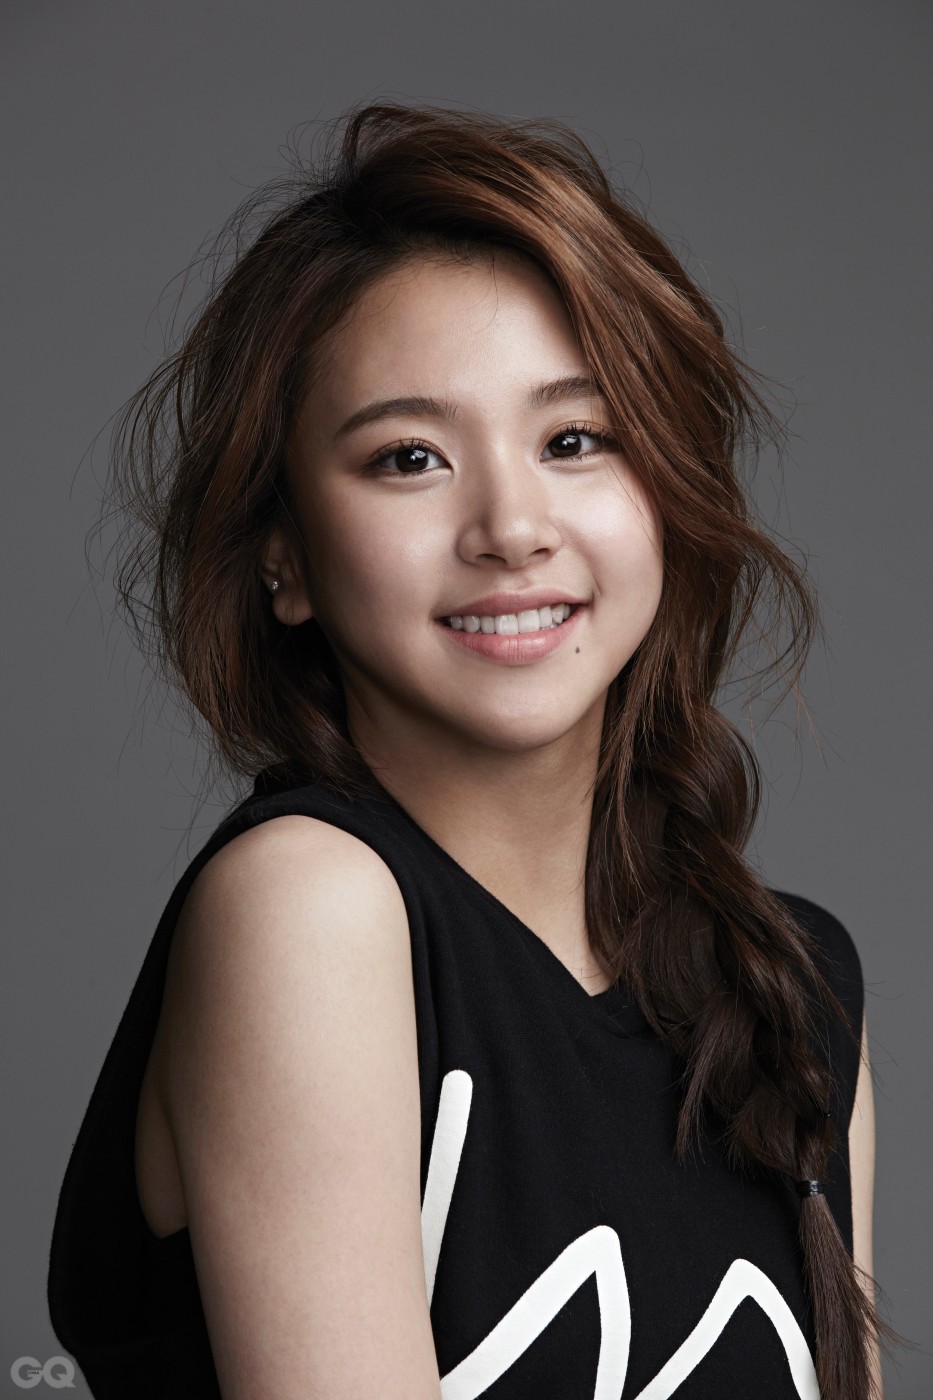 Chaeyoung Twice Image HD Wallpaper And